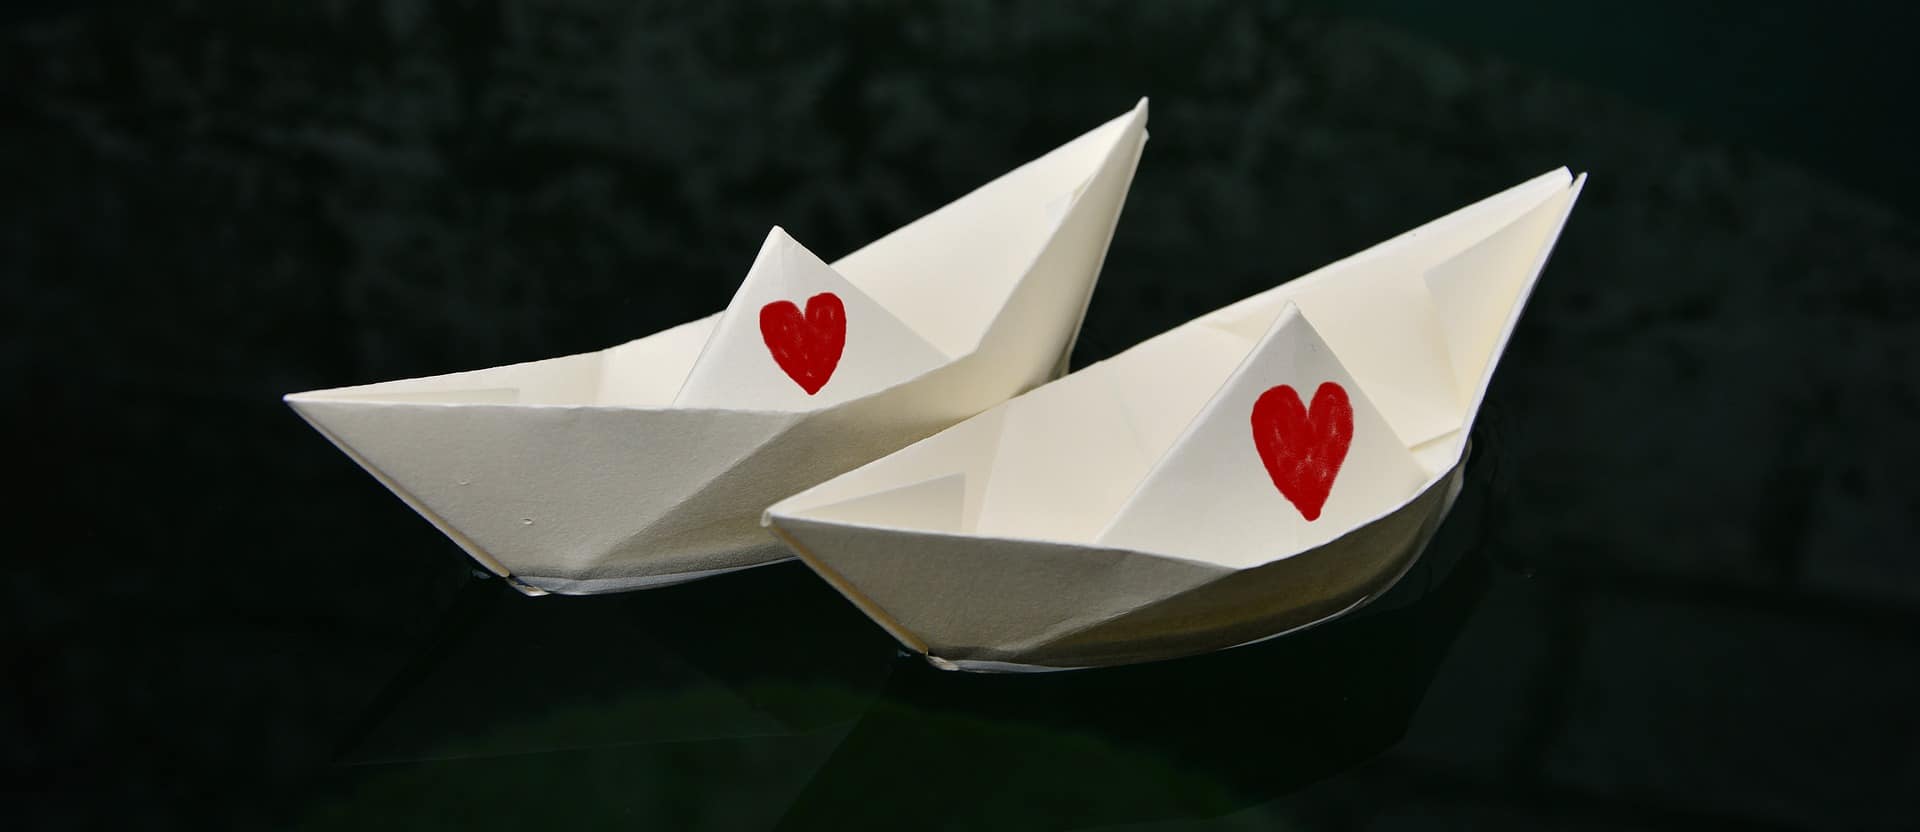 2 paper boats in the water with red hearts